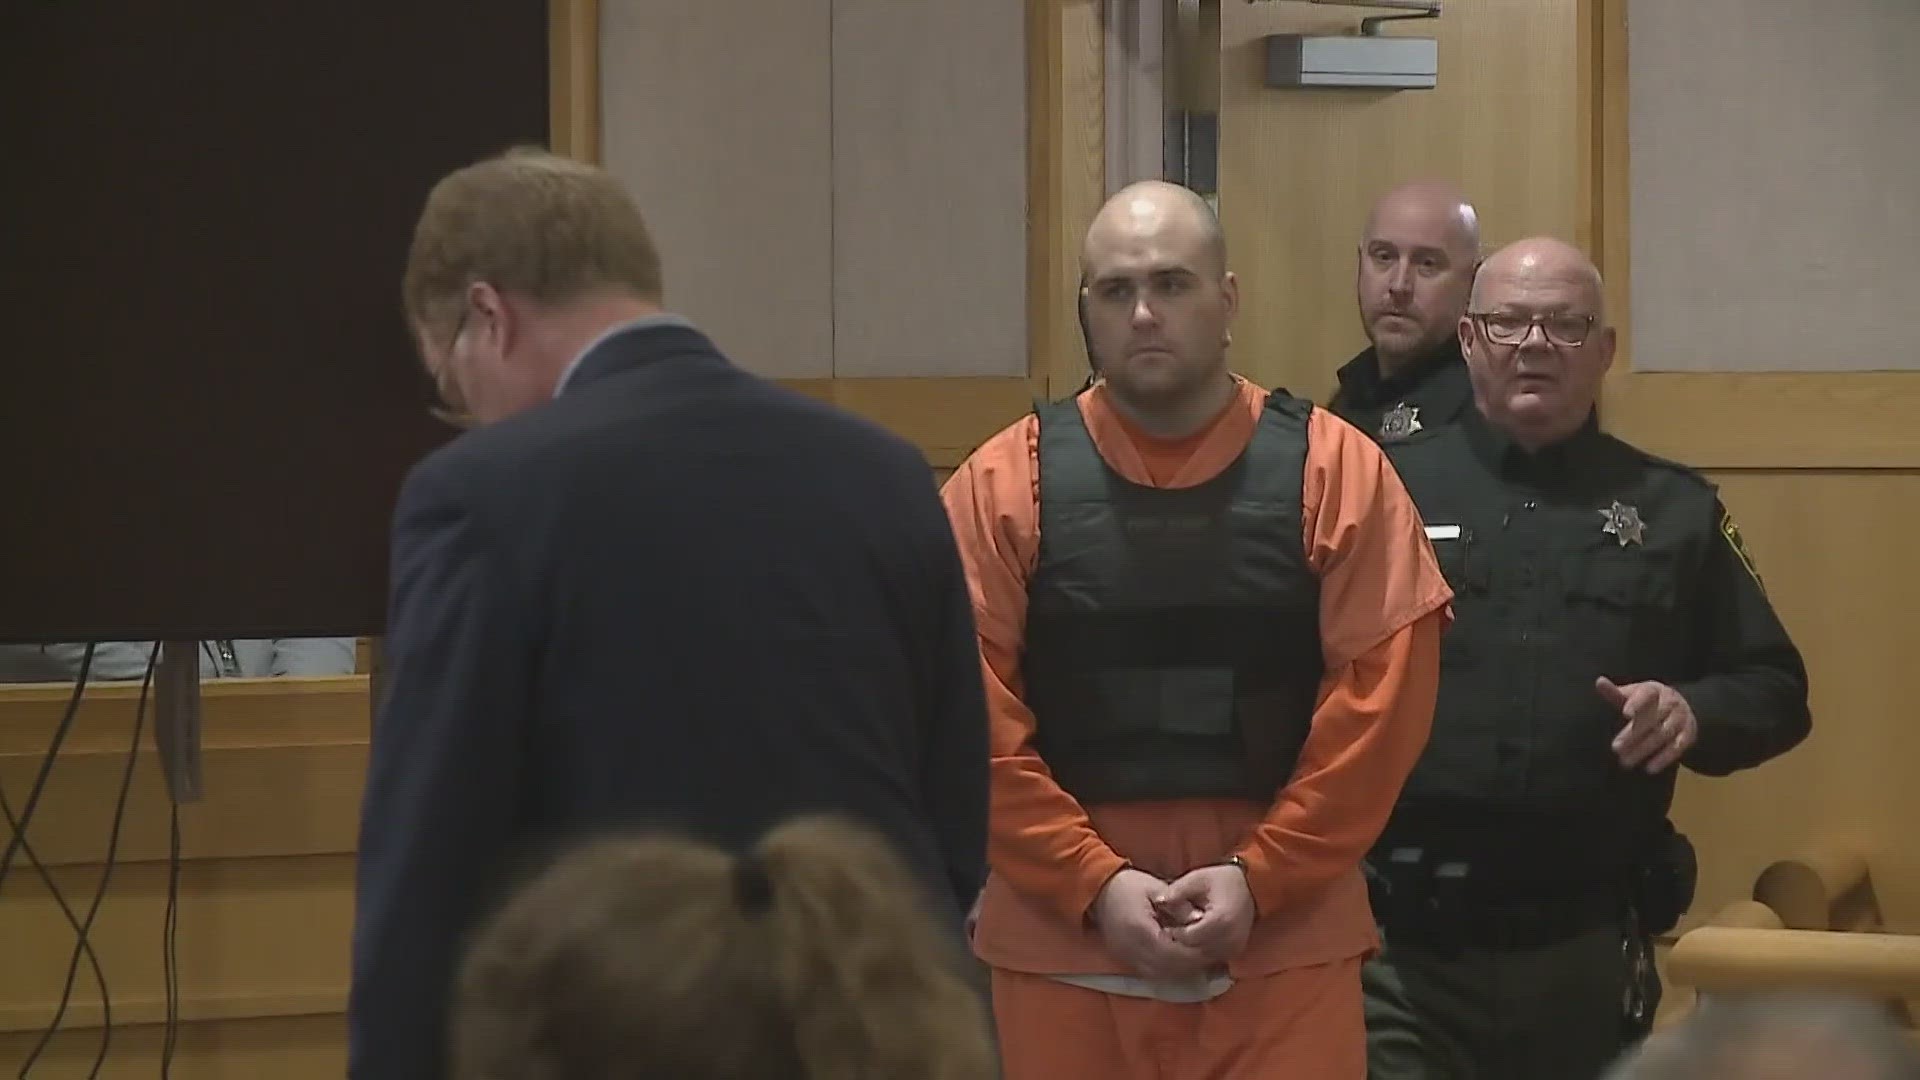 Joseph Eaton, 34, has been indicted on 11 charges related to a shooting spree on I-295 and the quadruple homicide in April.